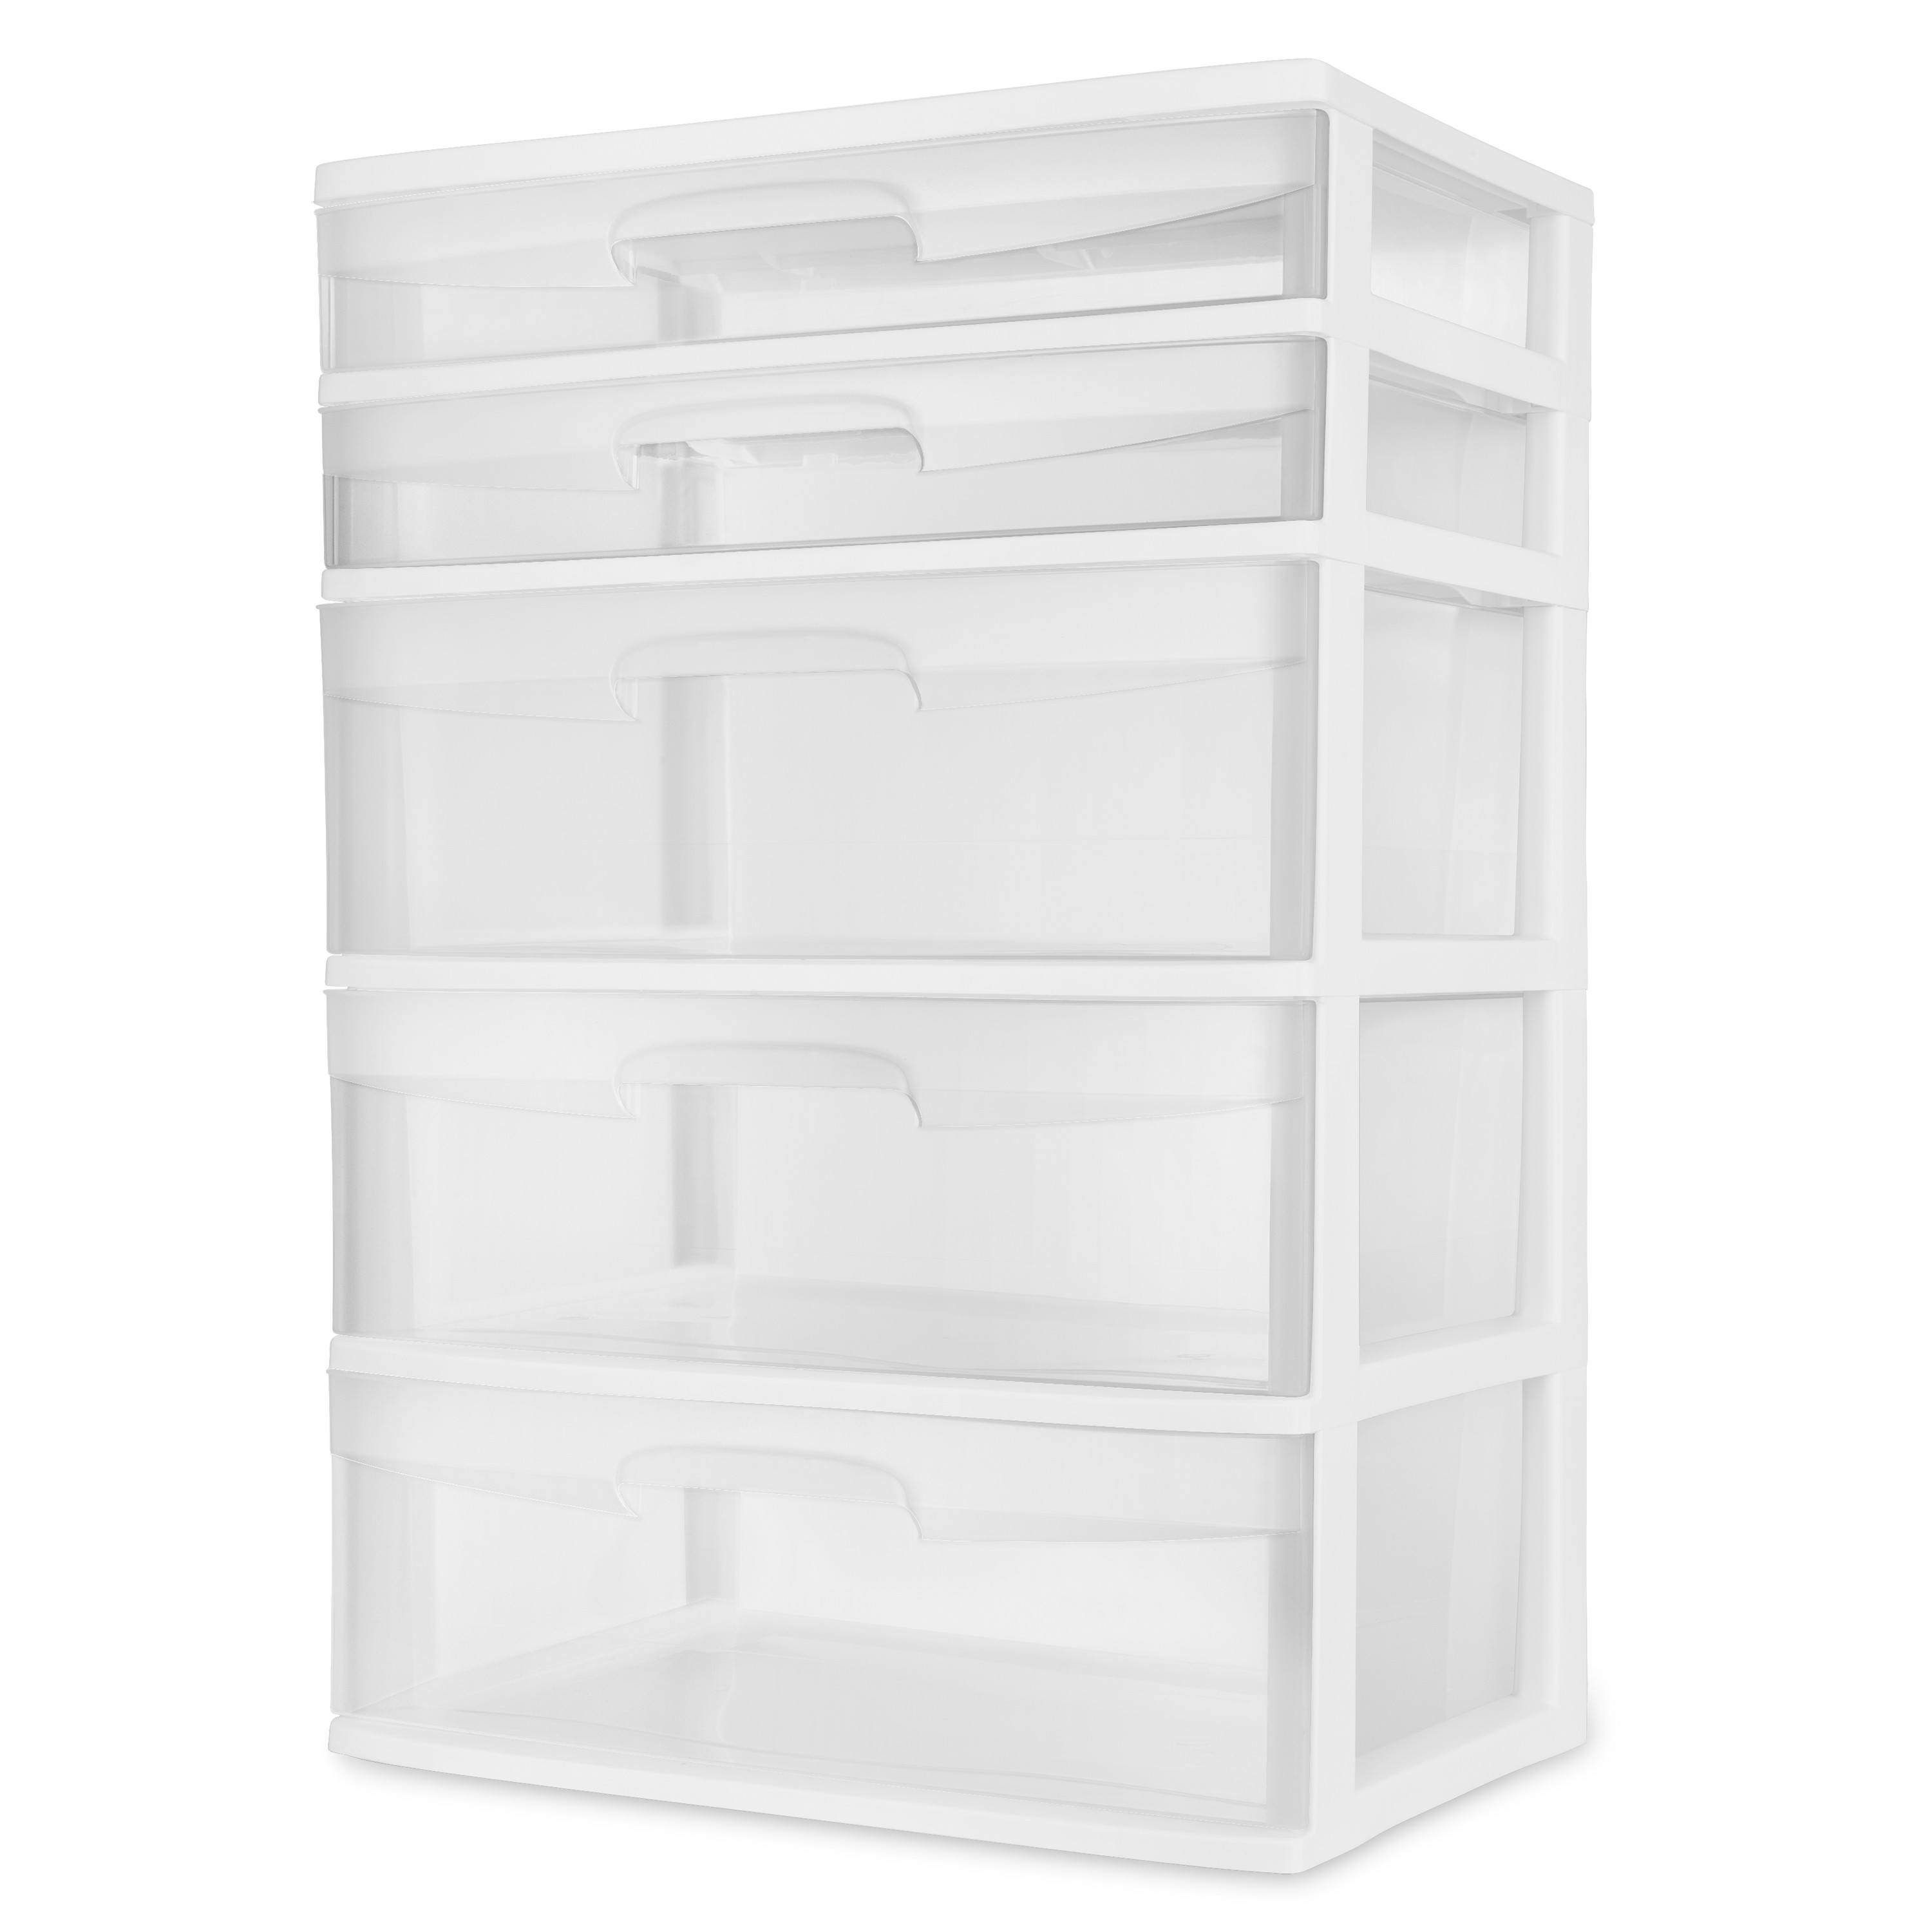 Sterilite Plastic 5 Drawer Wide Tower White - image 1 of 6